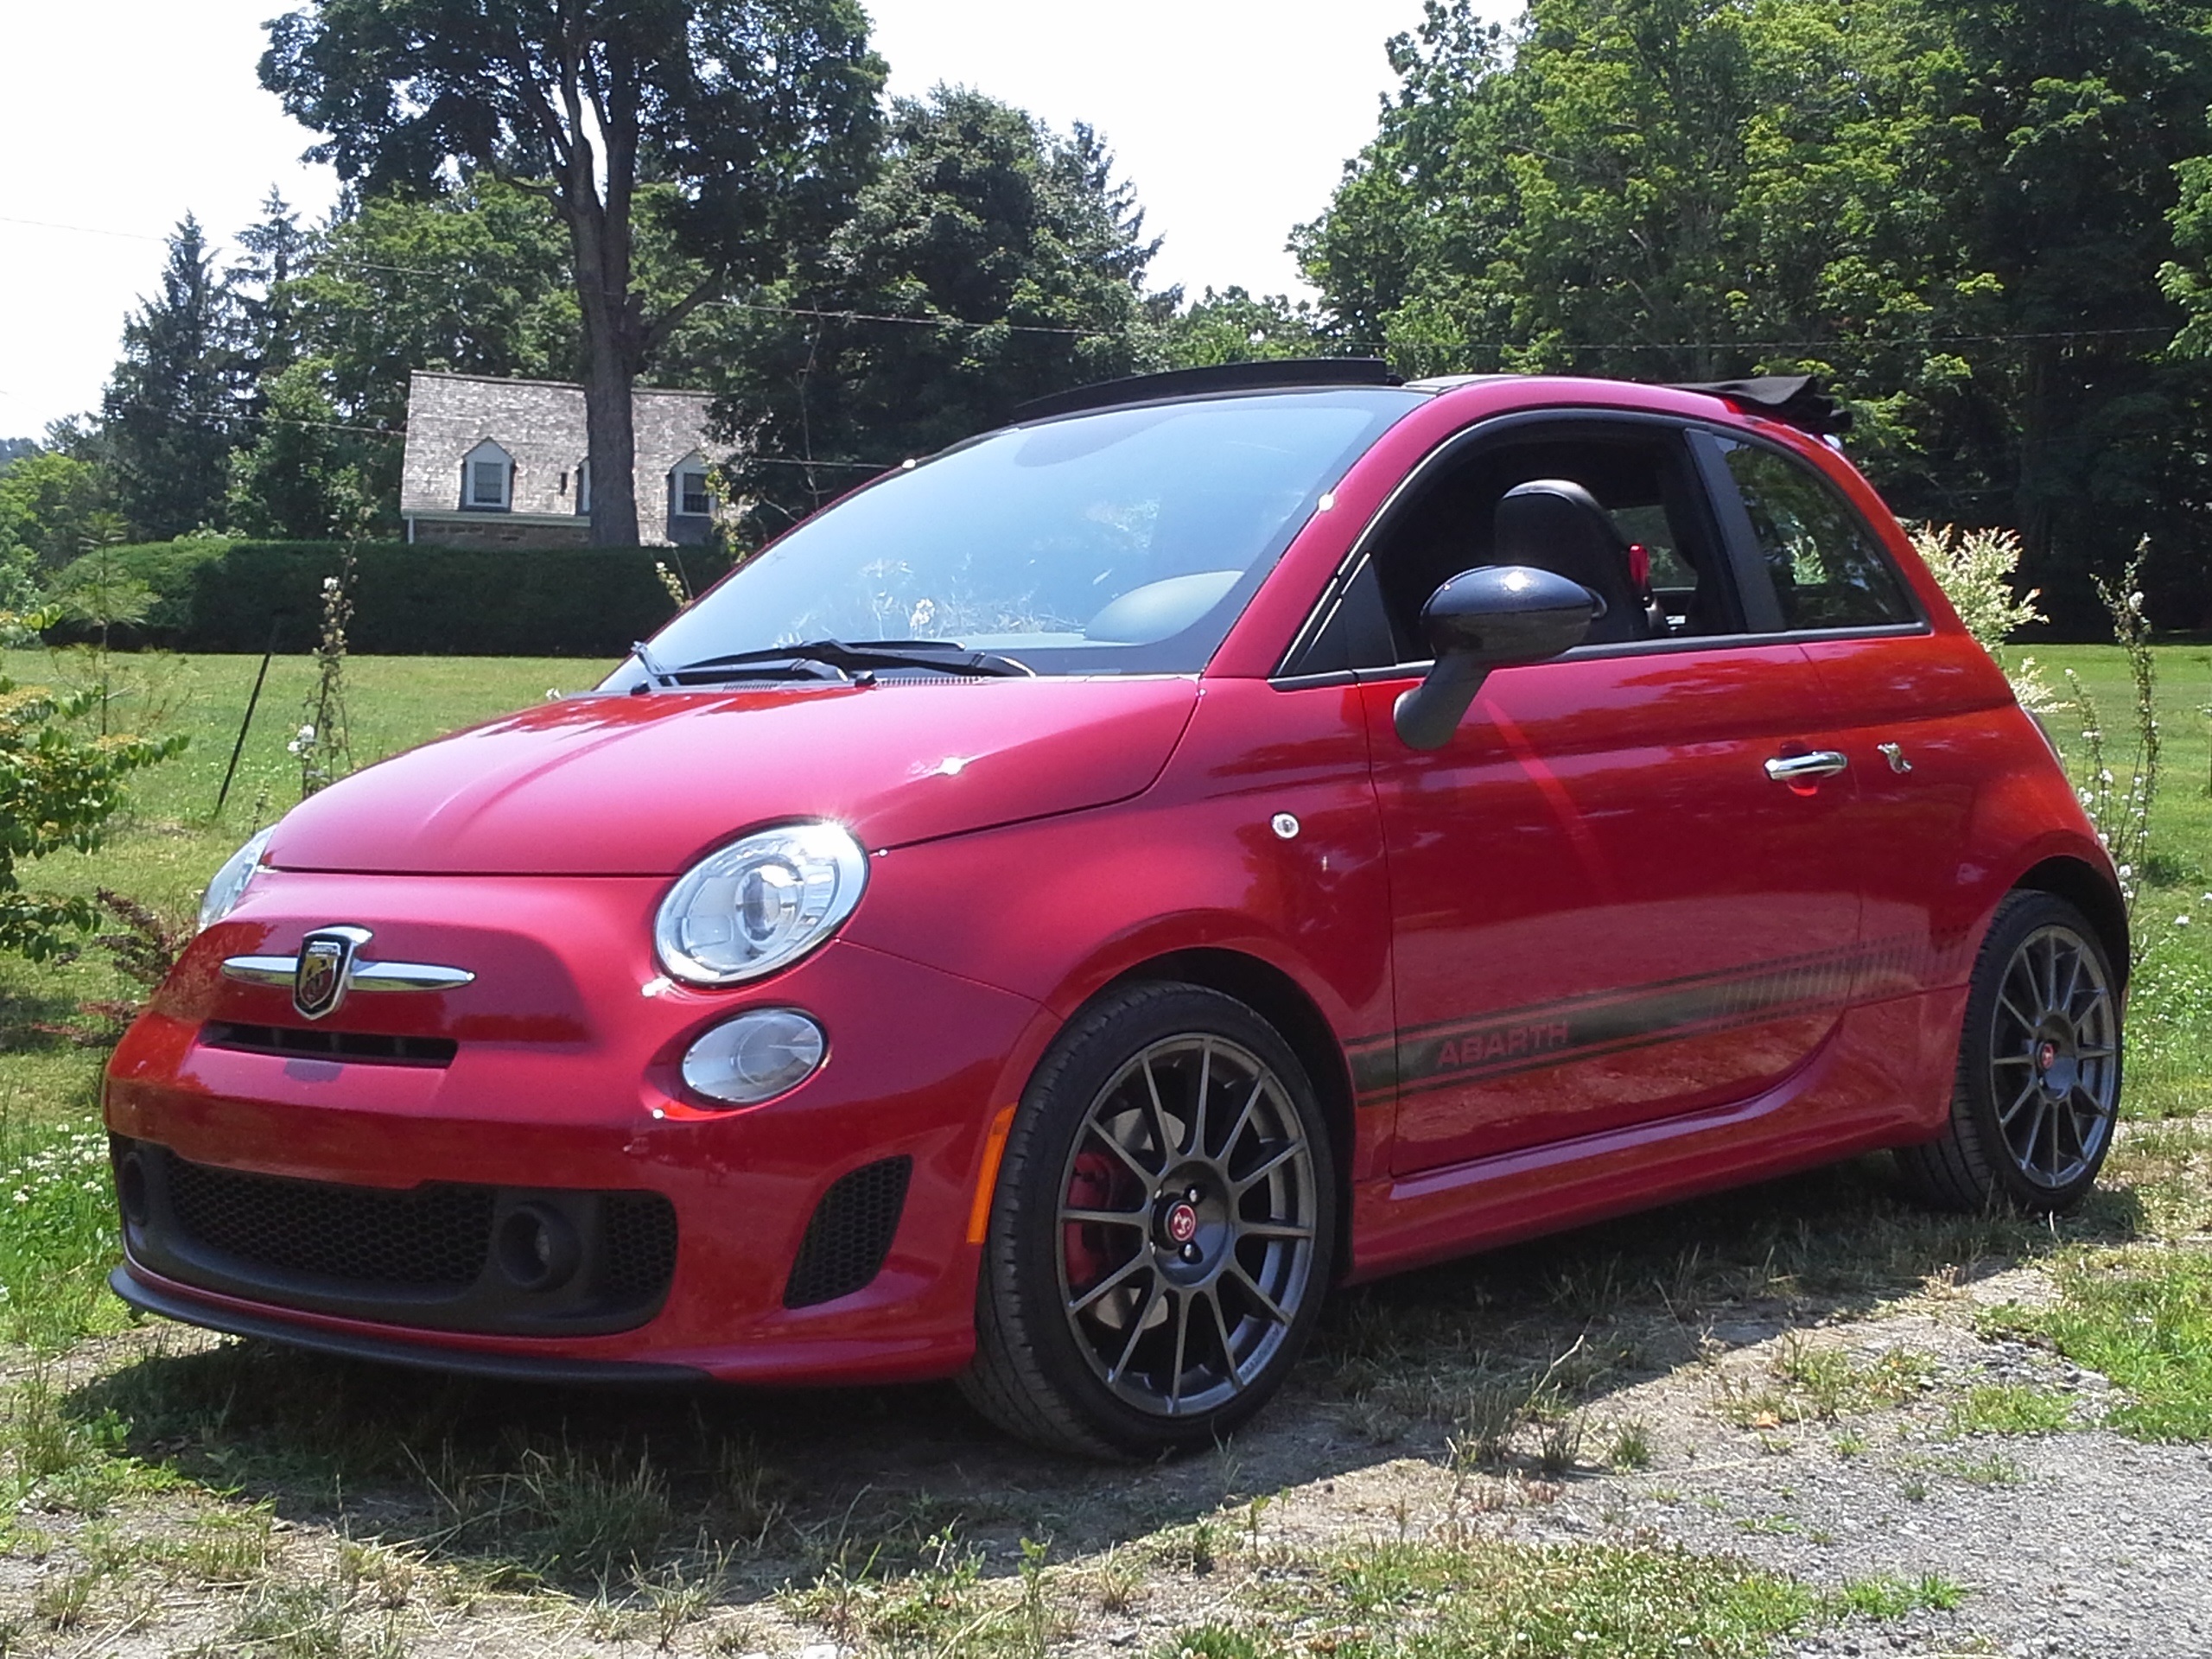 2013 Abarth Fun But Far From Fuel-Efficient